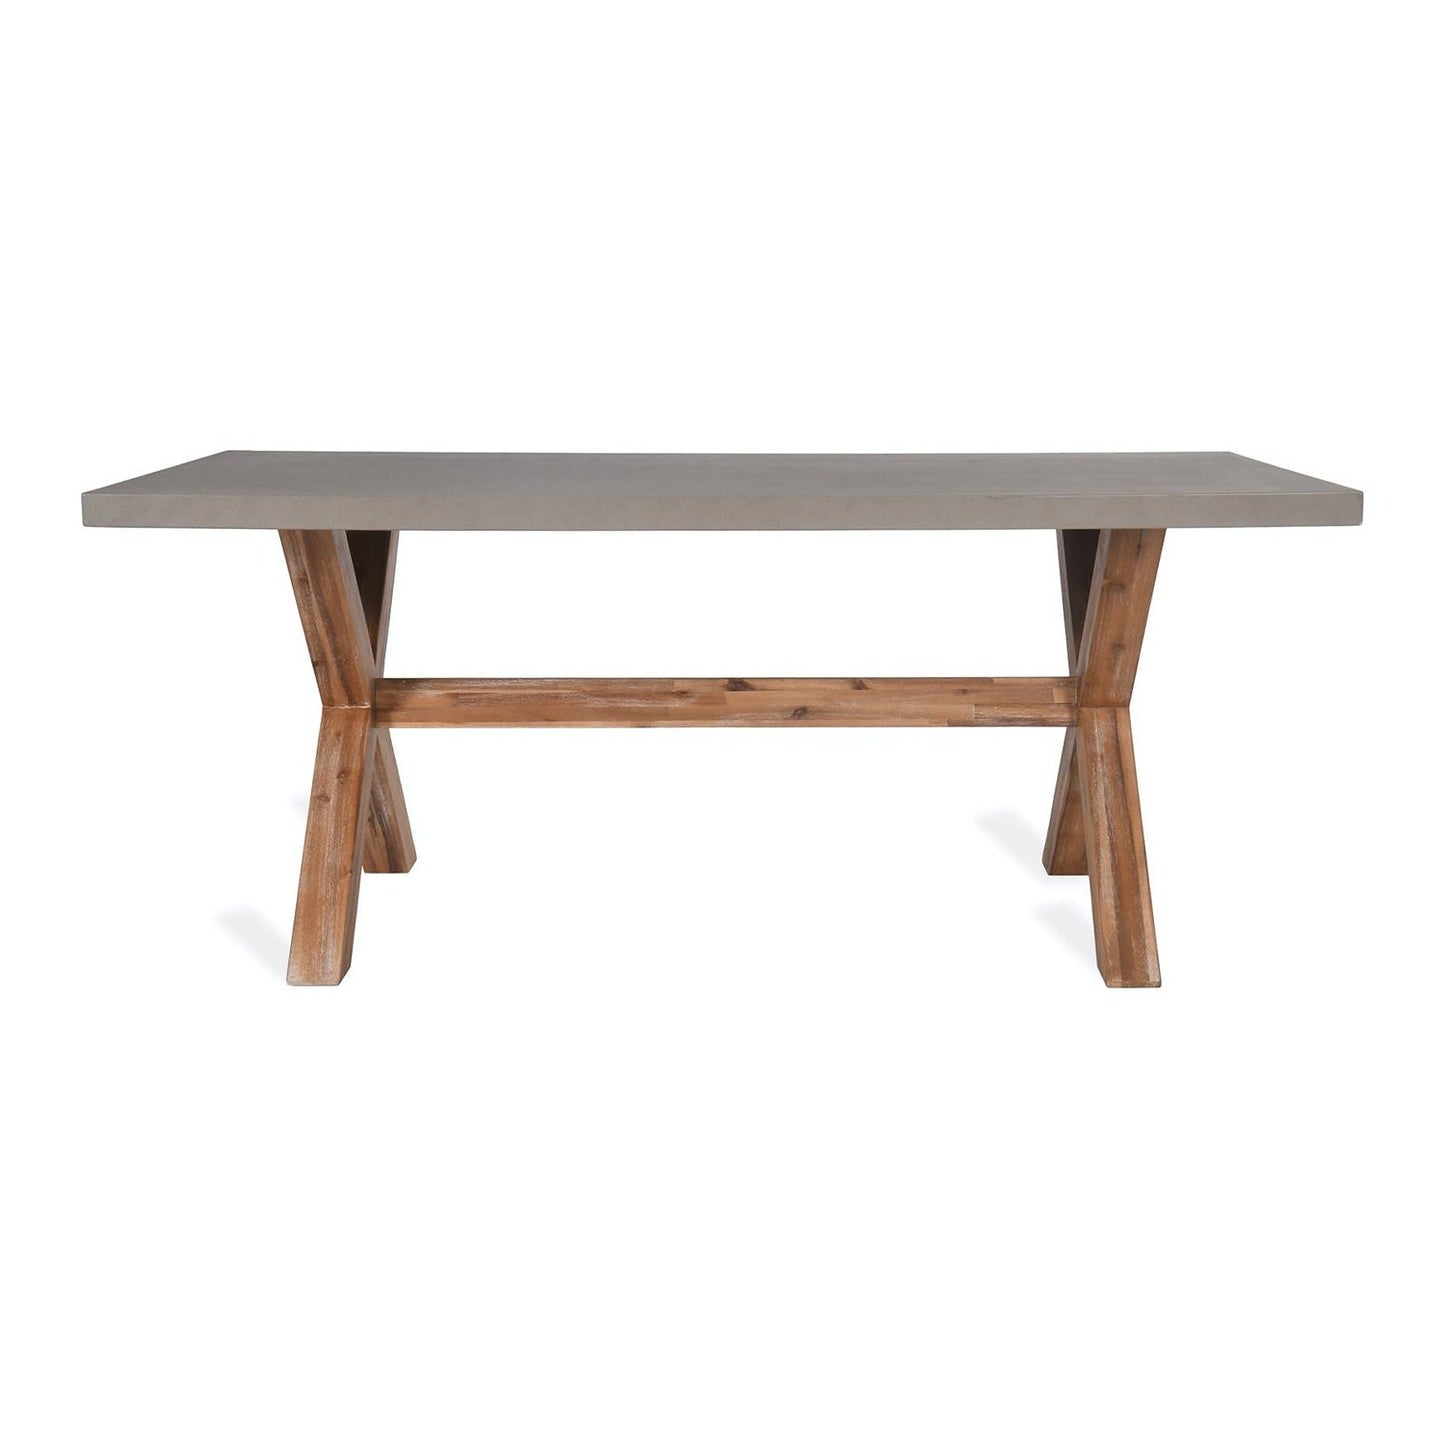 Burford Outdoor Table Small Natural Polystone by Garden Trading